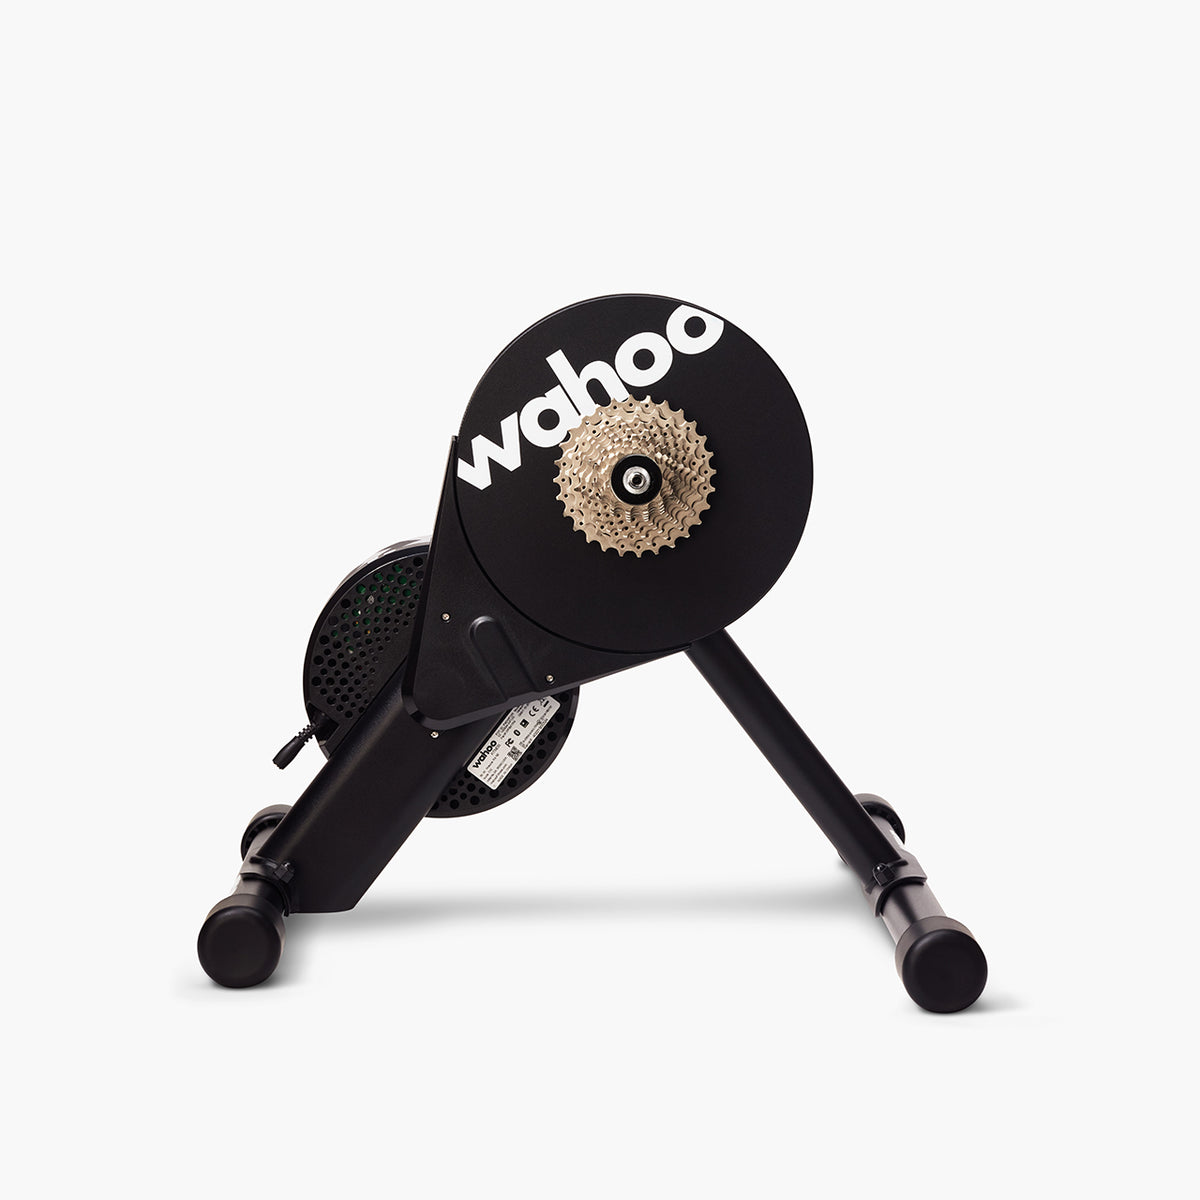 Wahoo KICKR CORE smart trainer with 10-speed cassette